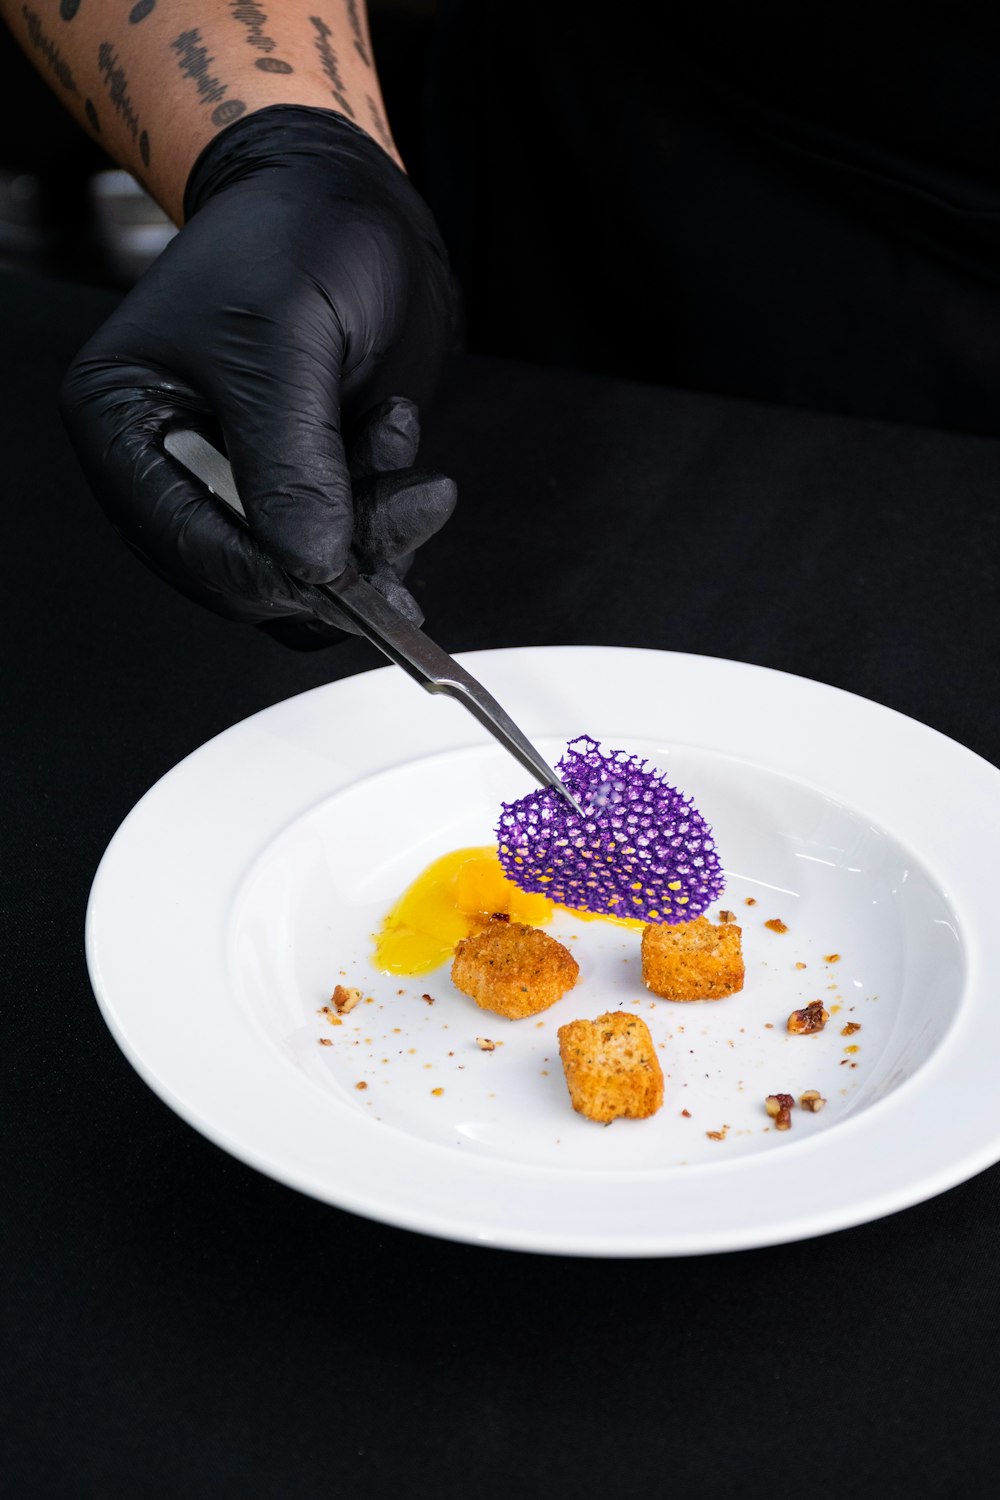 a person in black gloves is cutting a piece of food on a white plate